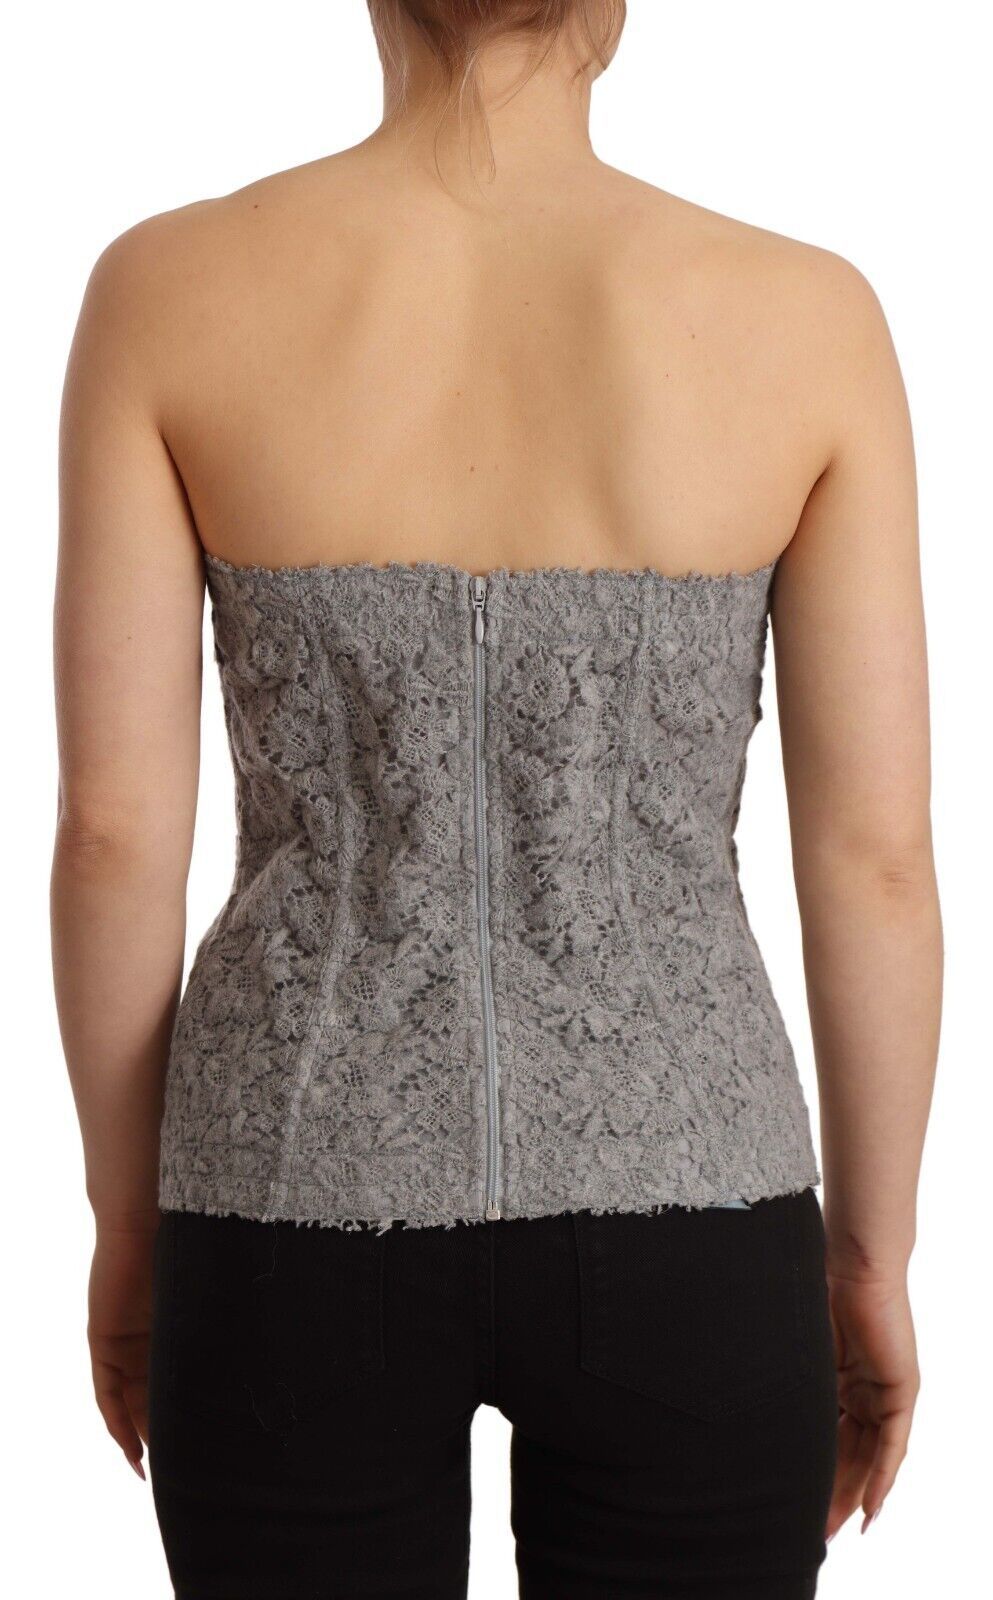 Chic Sweetheart Strapless Lace Bustier Top